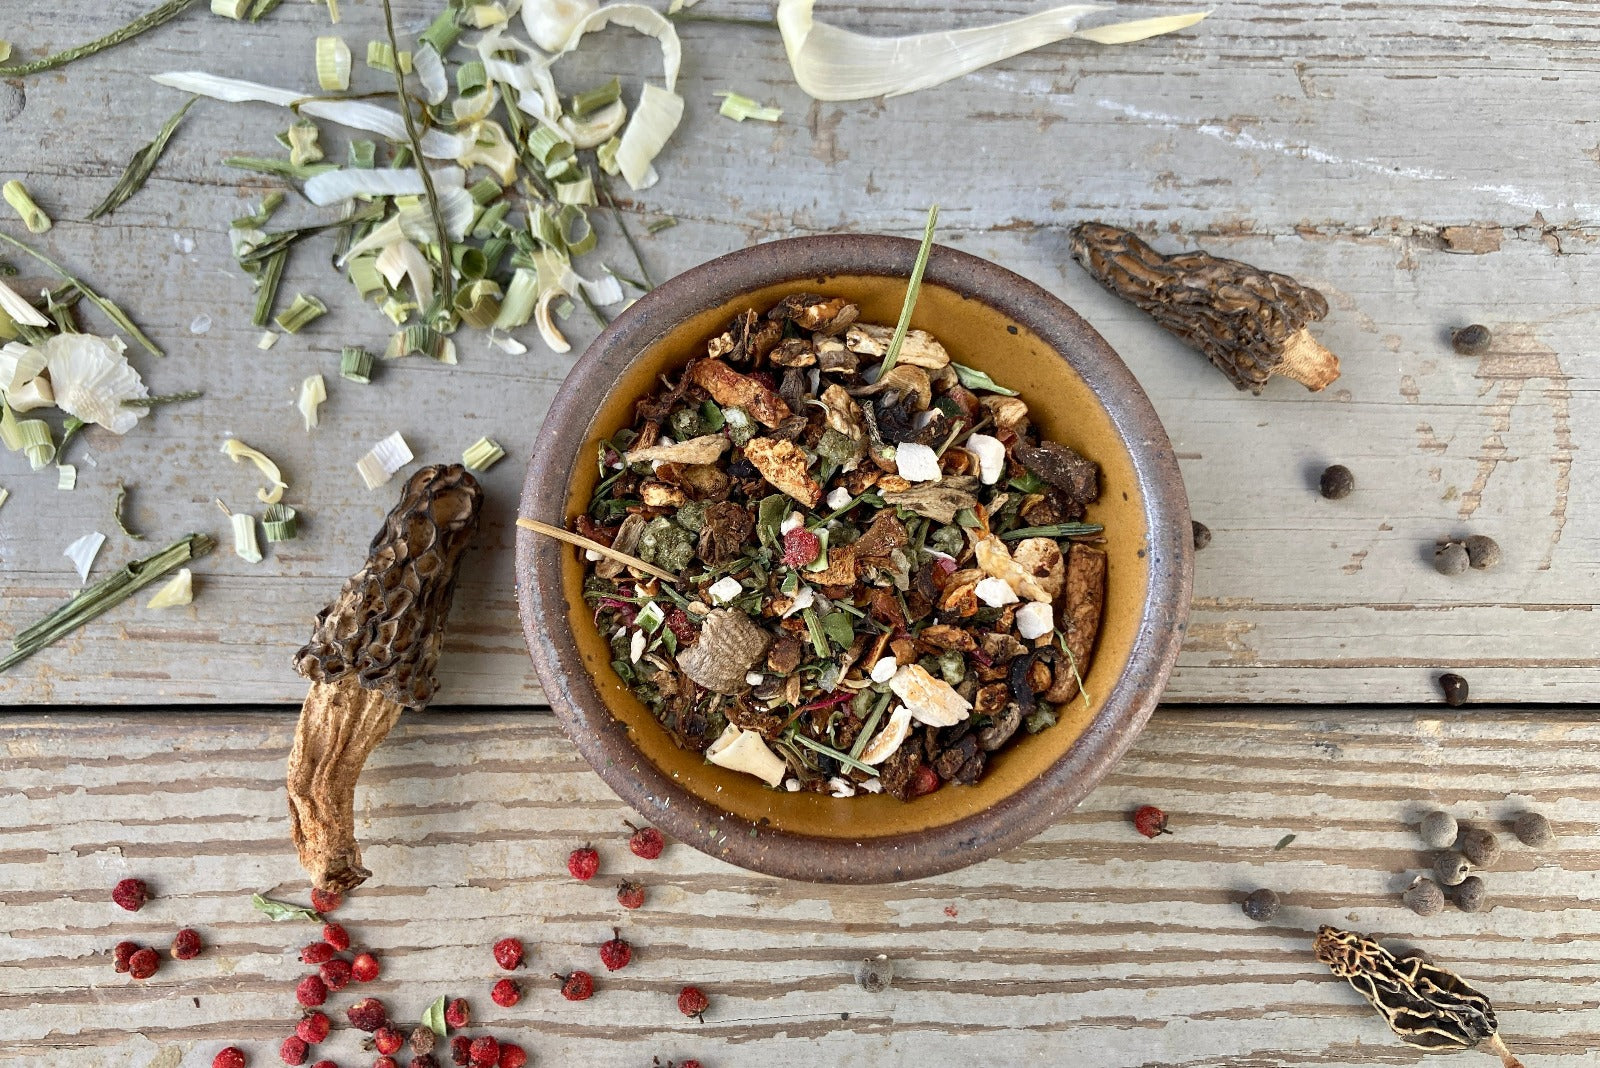 A bowl of Magical Forest Grinder from Well Seasoned Table on a wooden background with wild onions, dried morels, and sumac berries around it. 